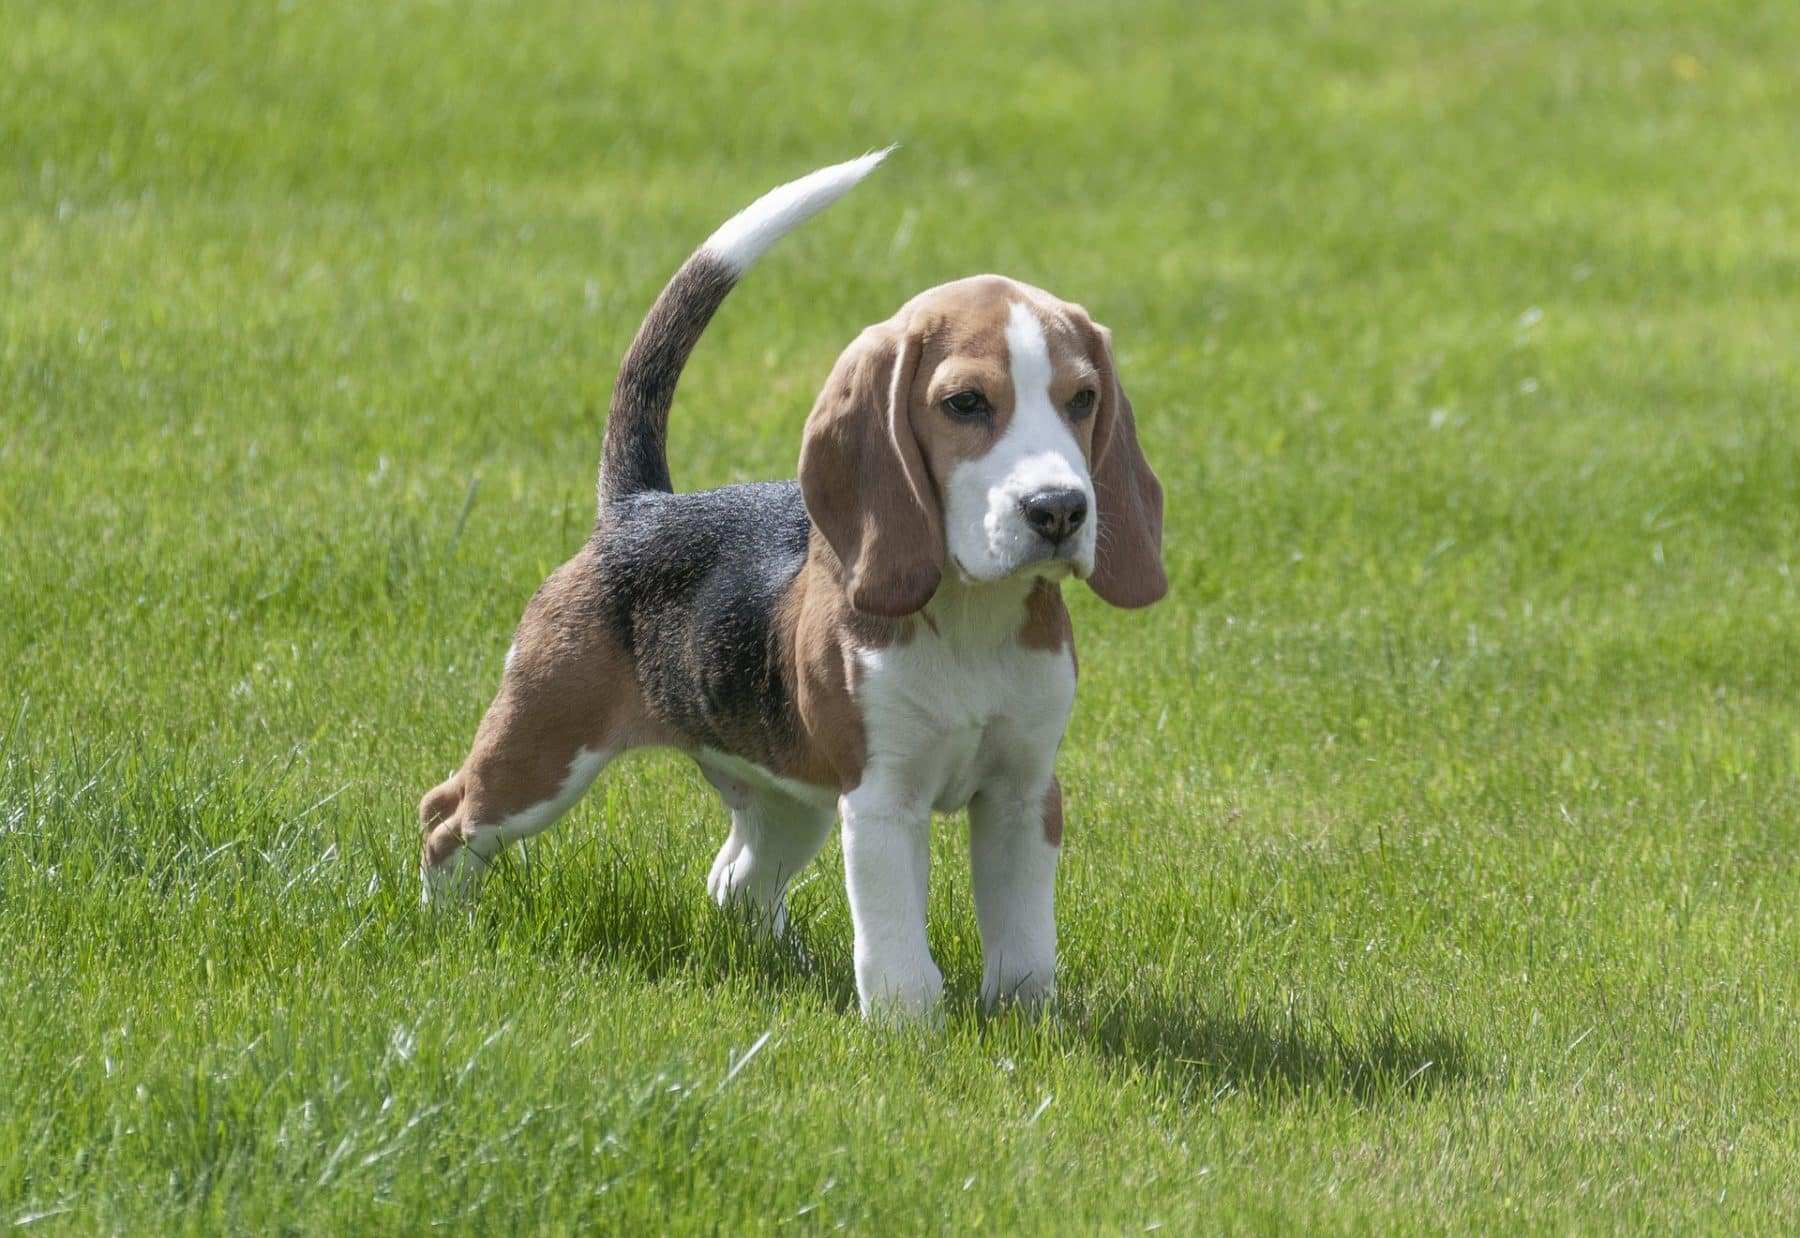 THE BEAGLE 15 Dogs Breed